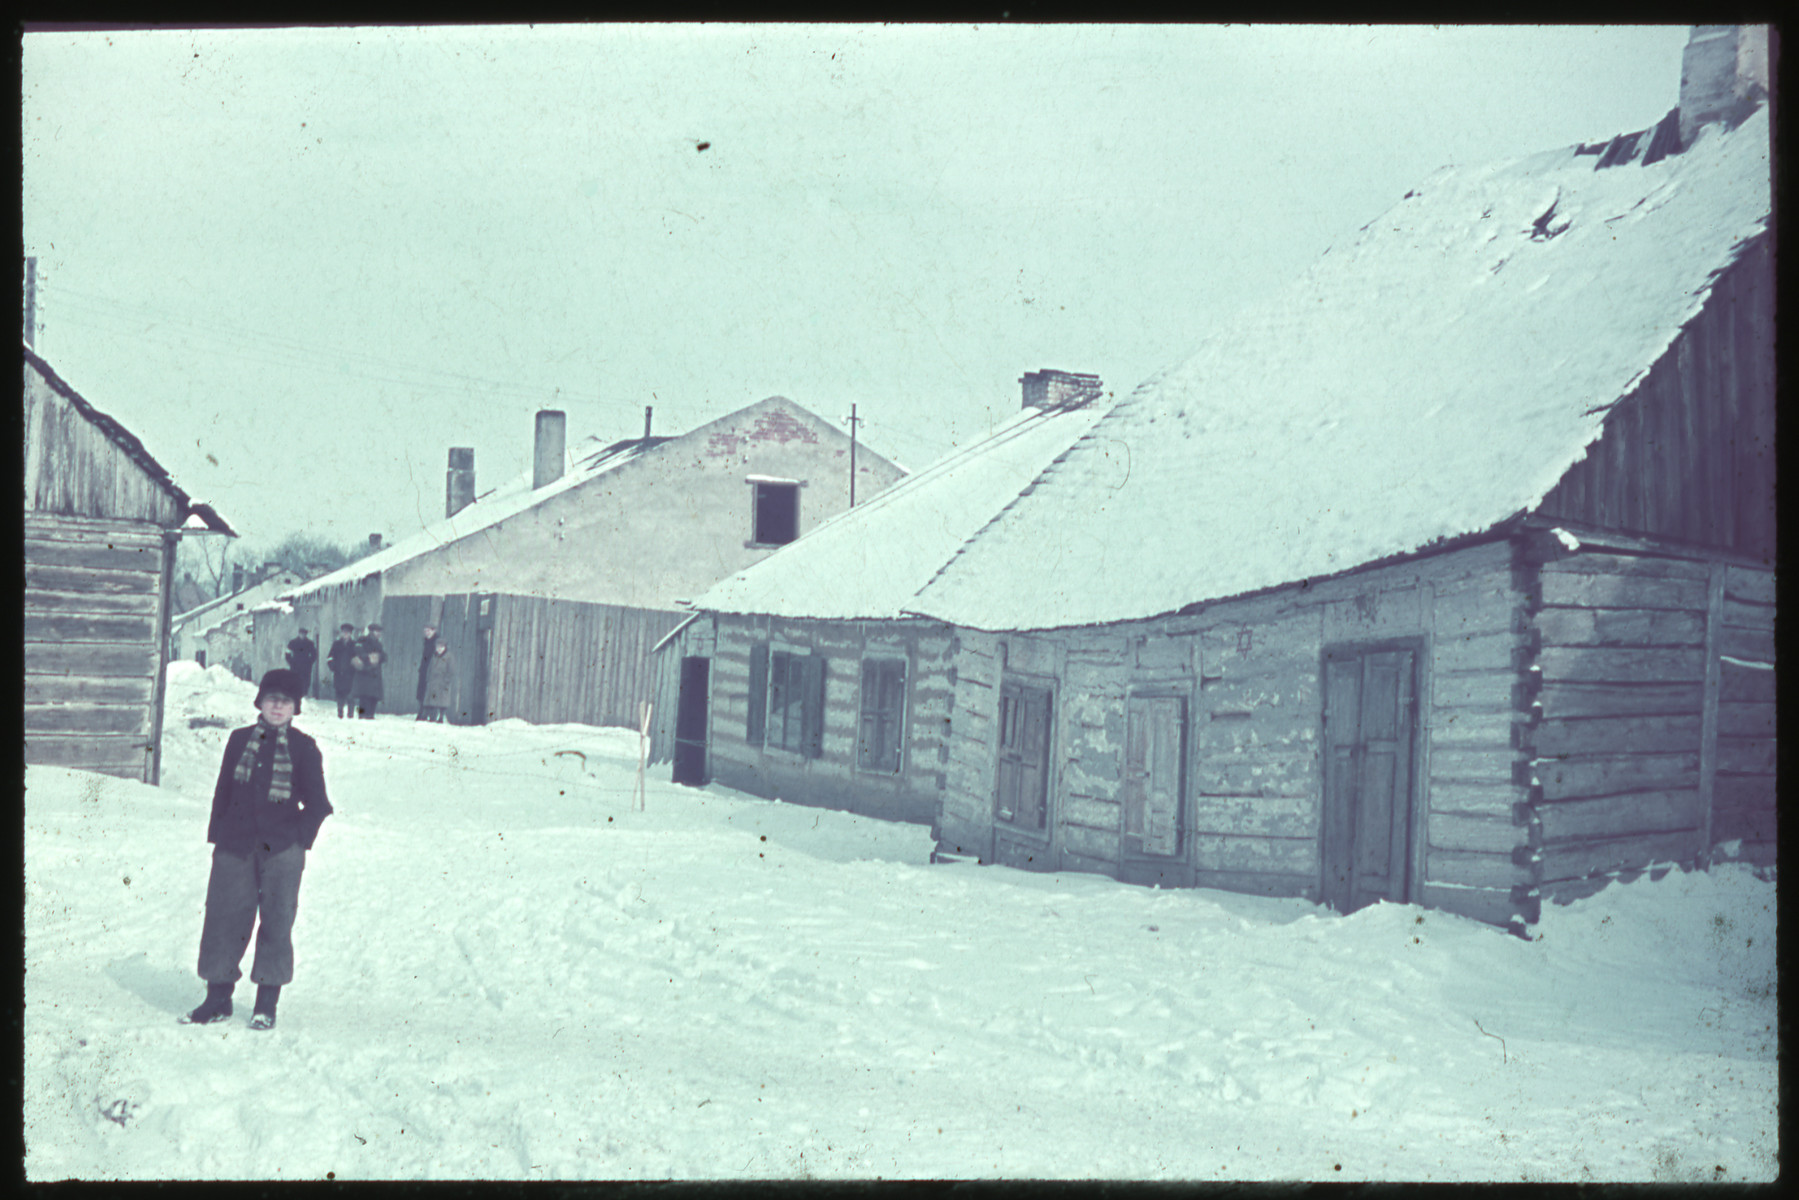 A young boy stands on a snowy road next to a building marked with a Jewish star on its exterior wall while men wearing armbands gather in the background.